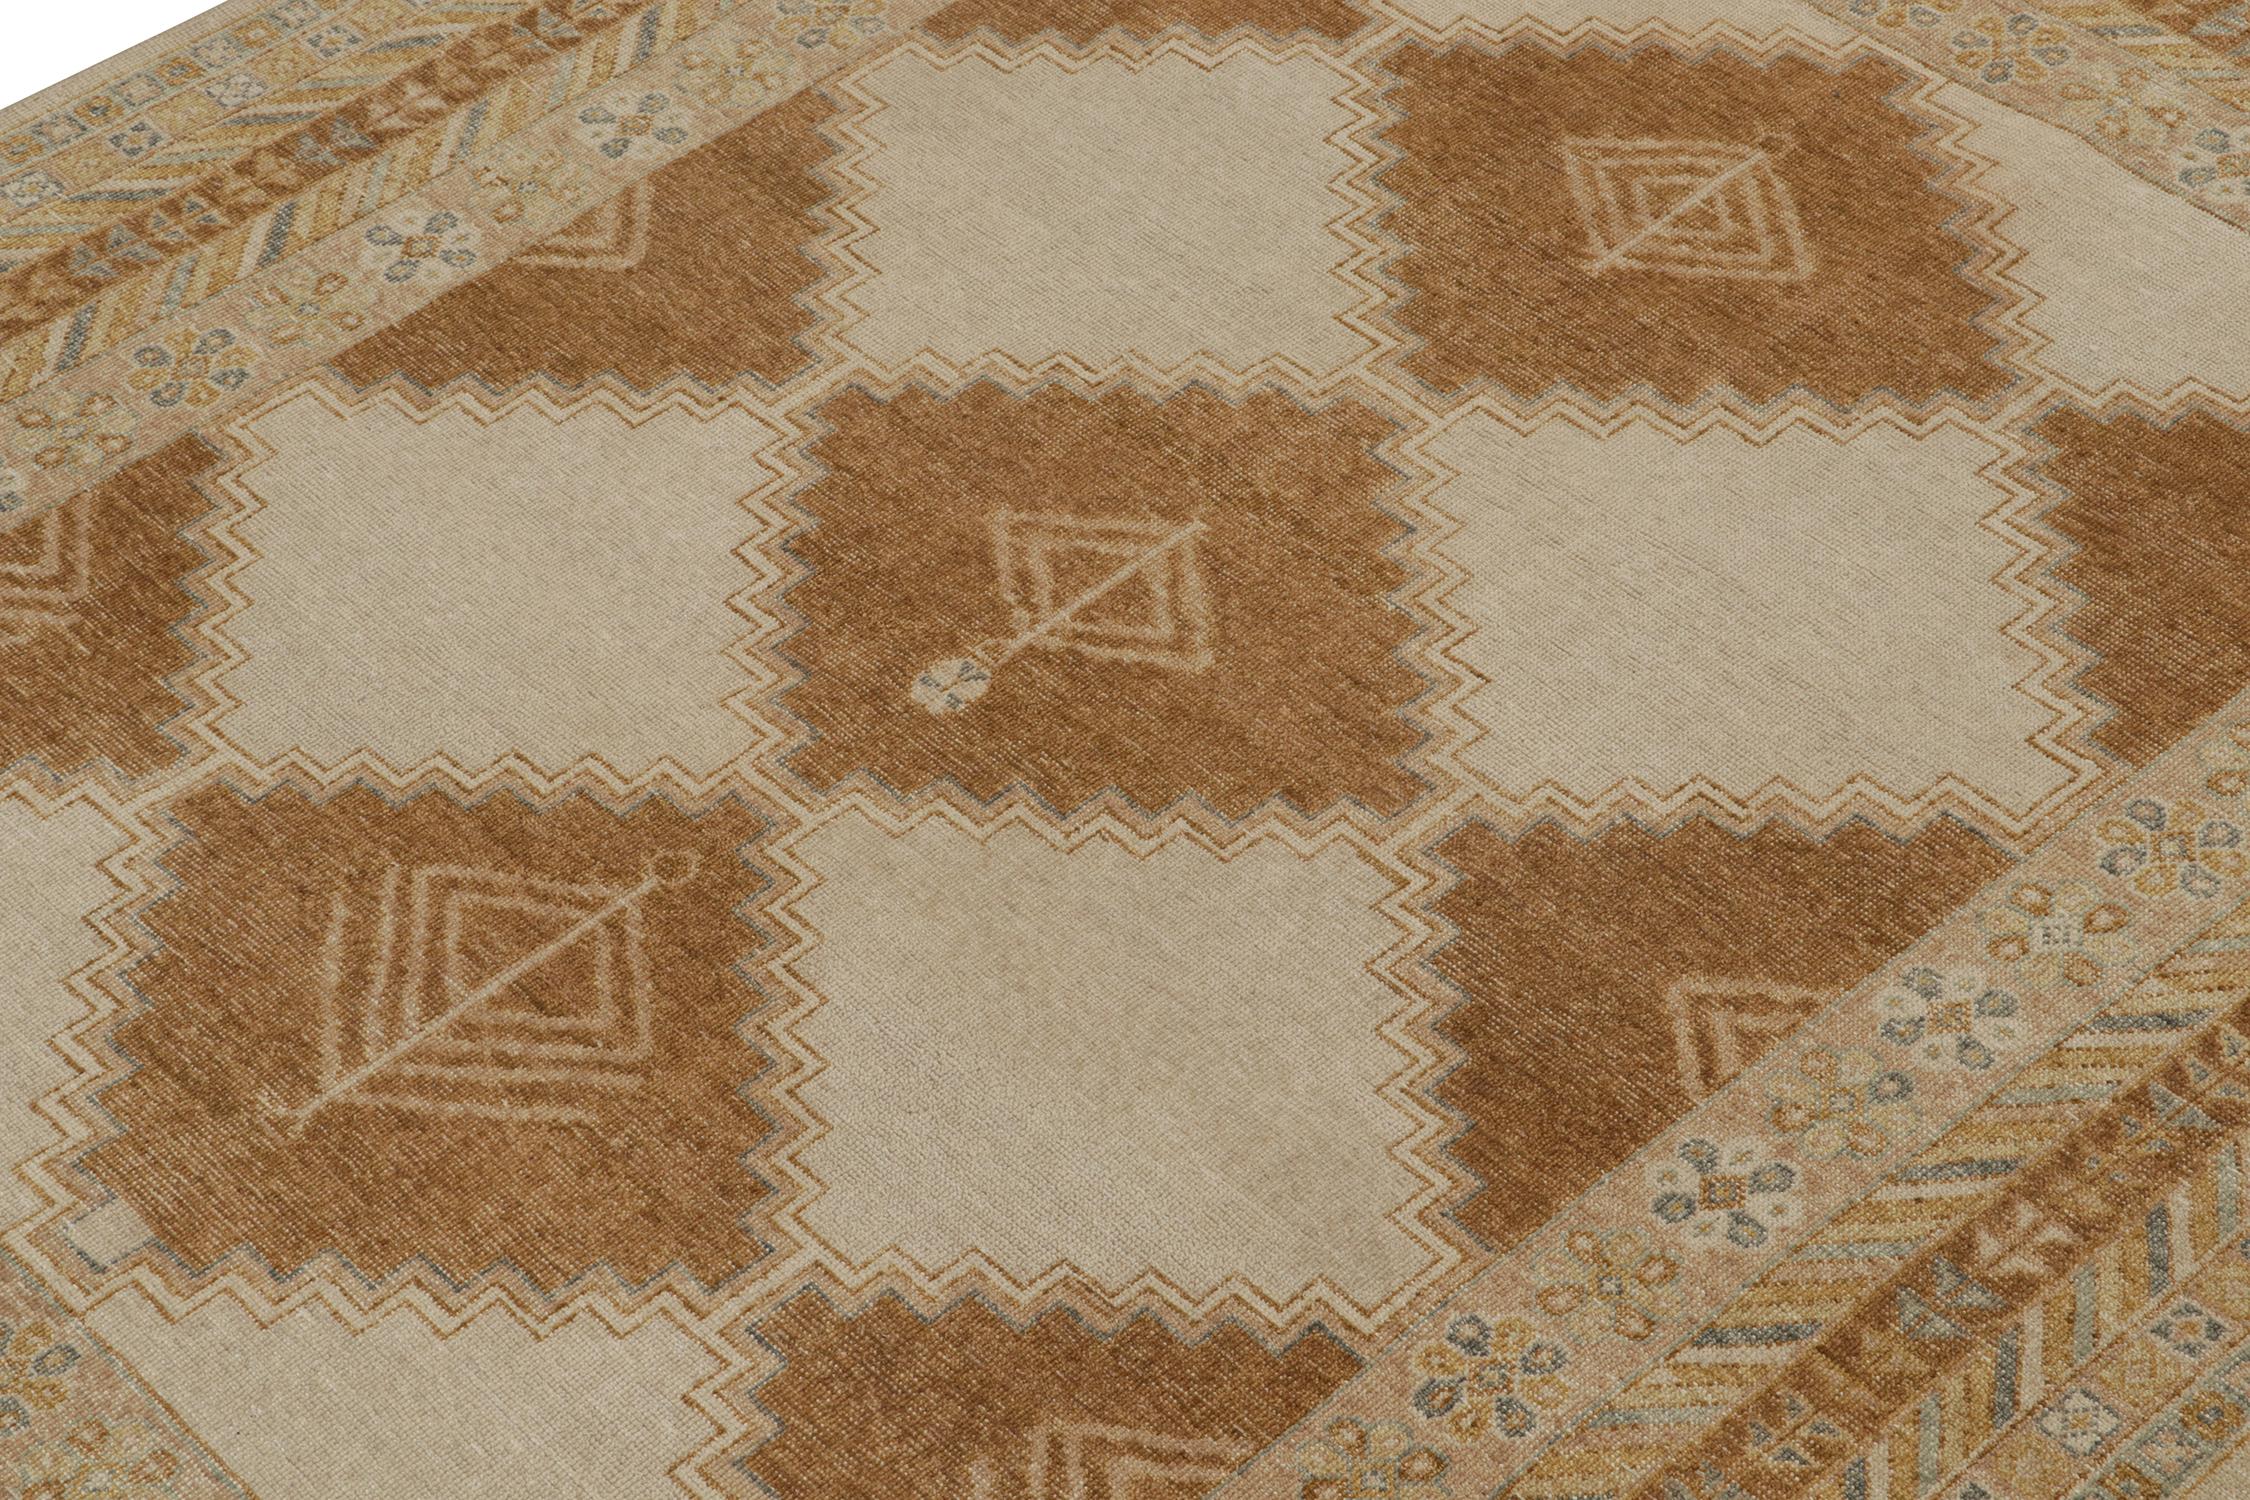 Hand-Knotted Rug & Kilim’s Distressed Tribal Style Rug in Beige, Brown and Gold Patterns For Sale